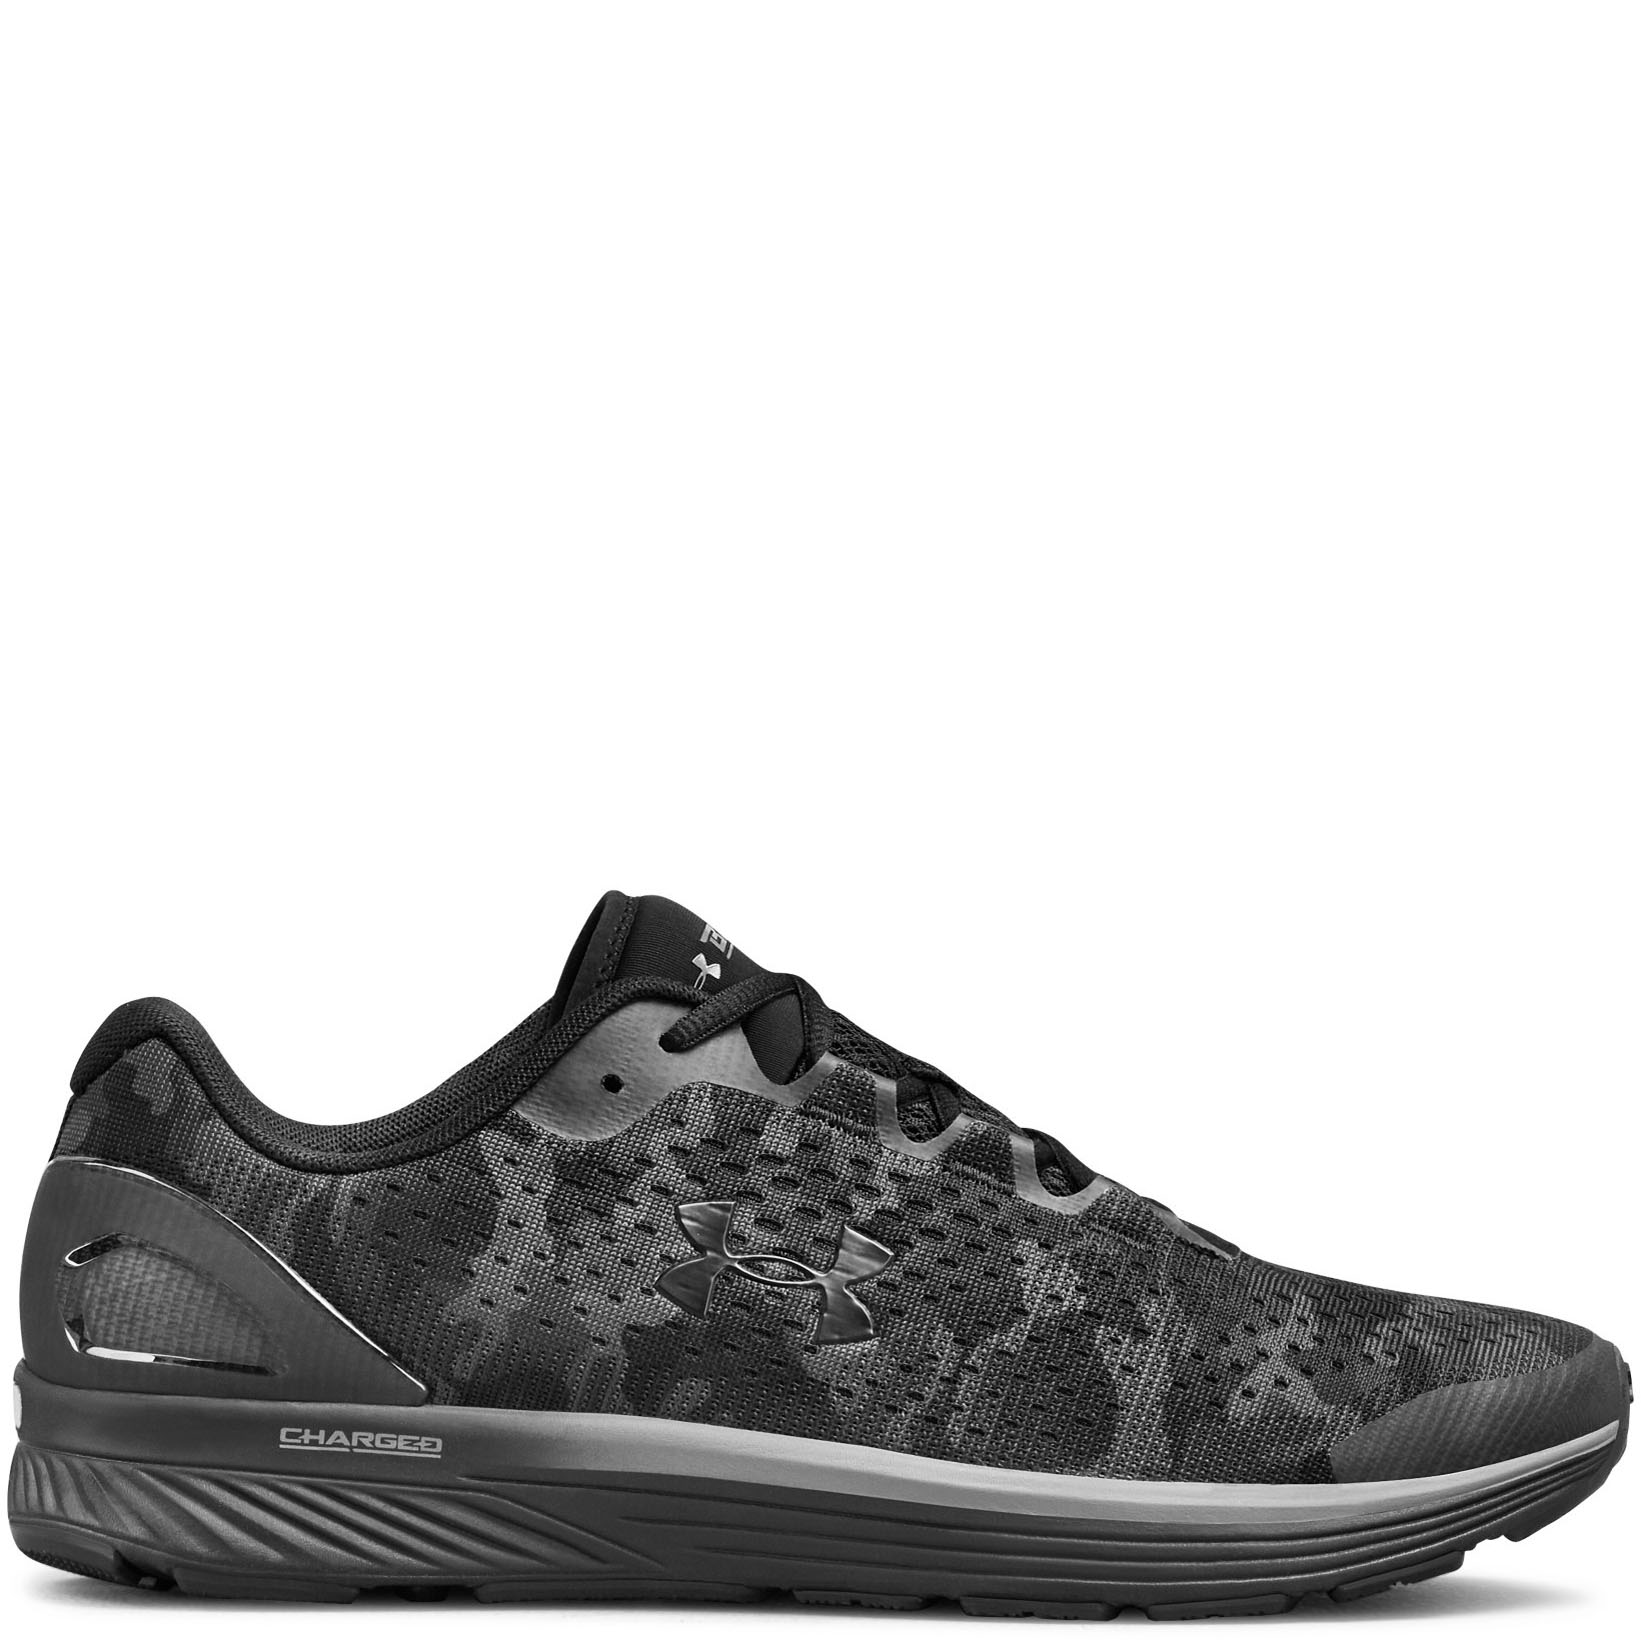 Мужские кроссовки Under Armour Charged Bandit 4 Graphic 3021643-001